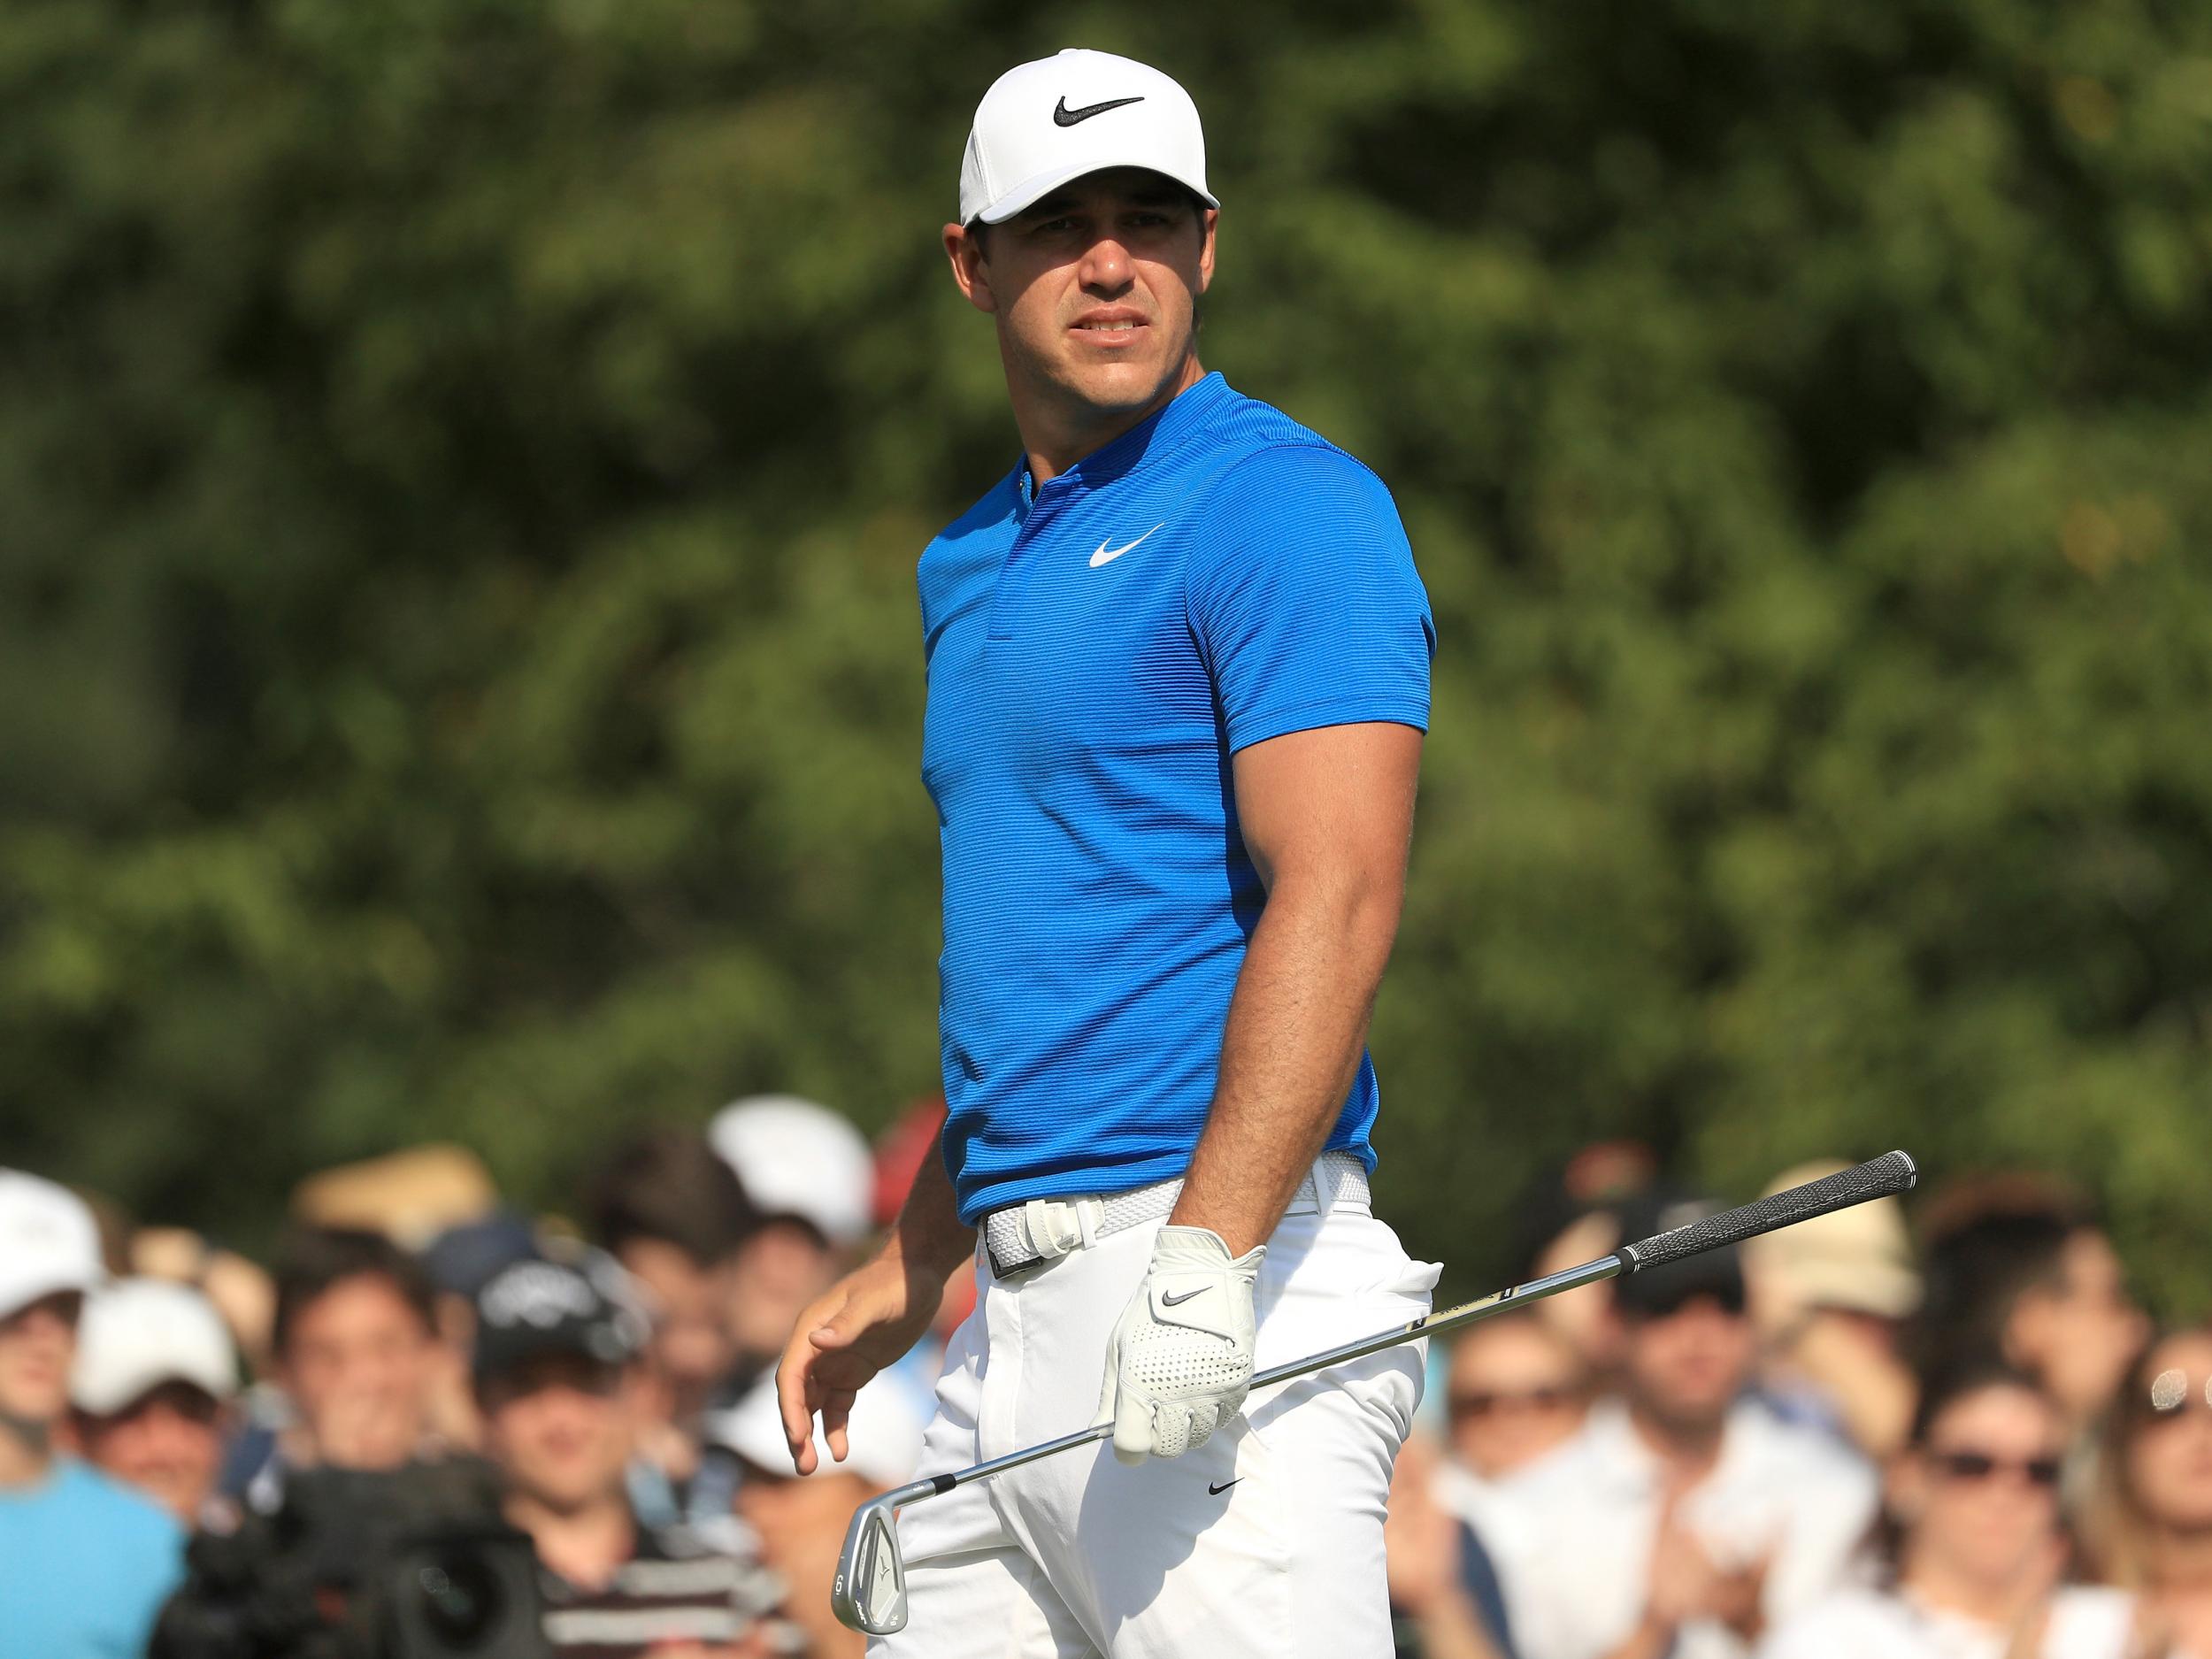 Brooks Koepka did not shout the traditional warning of 'fore' following his drive